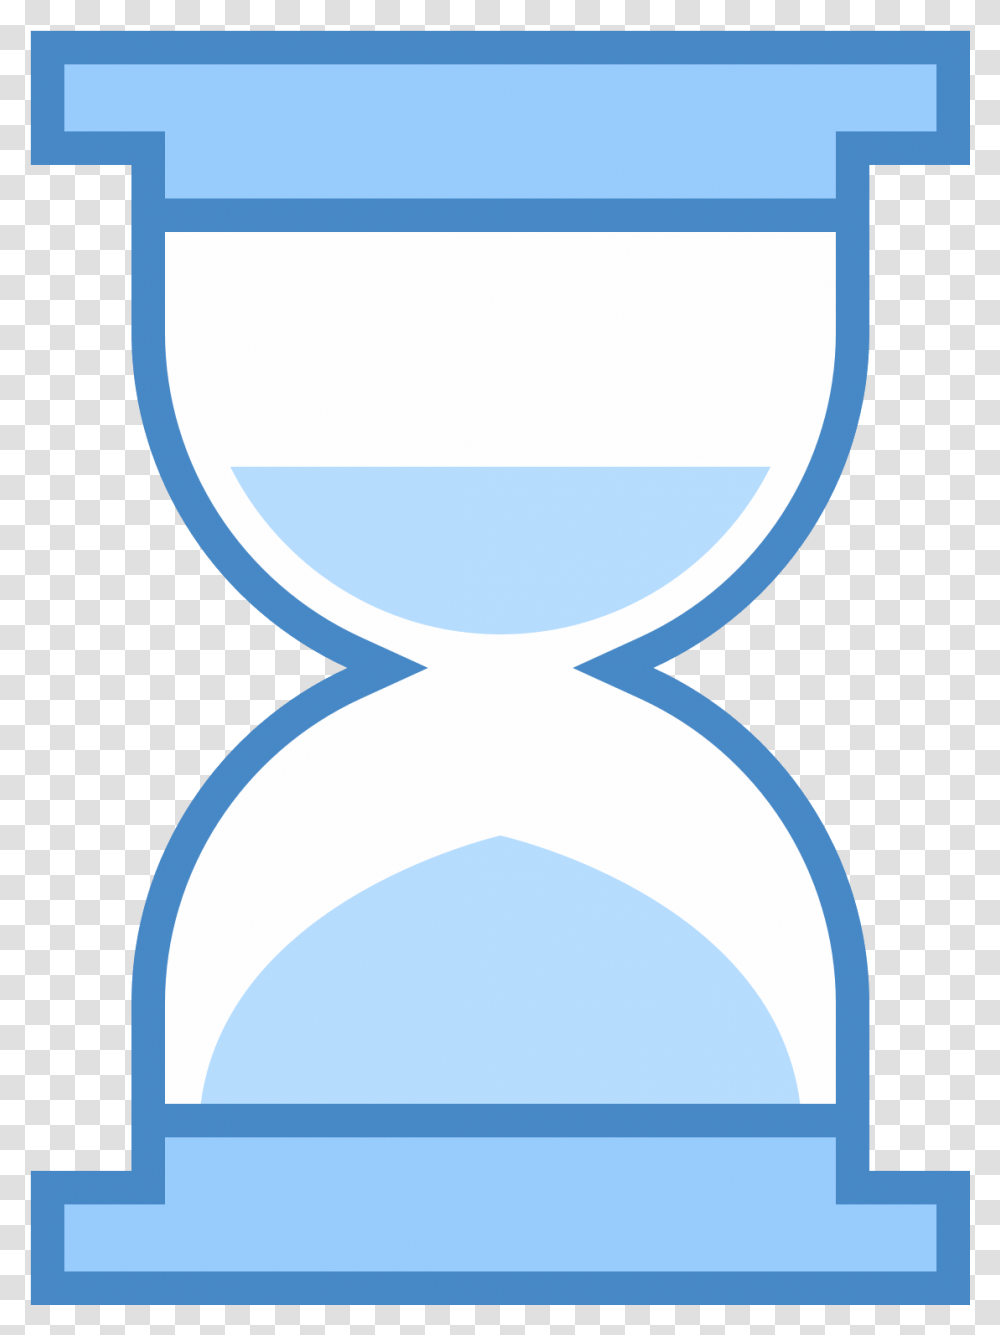 It's A Logo Of An Hourglass Reduced To An Image Of Icon Transparent Png